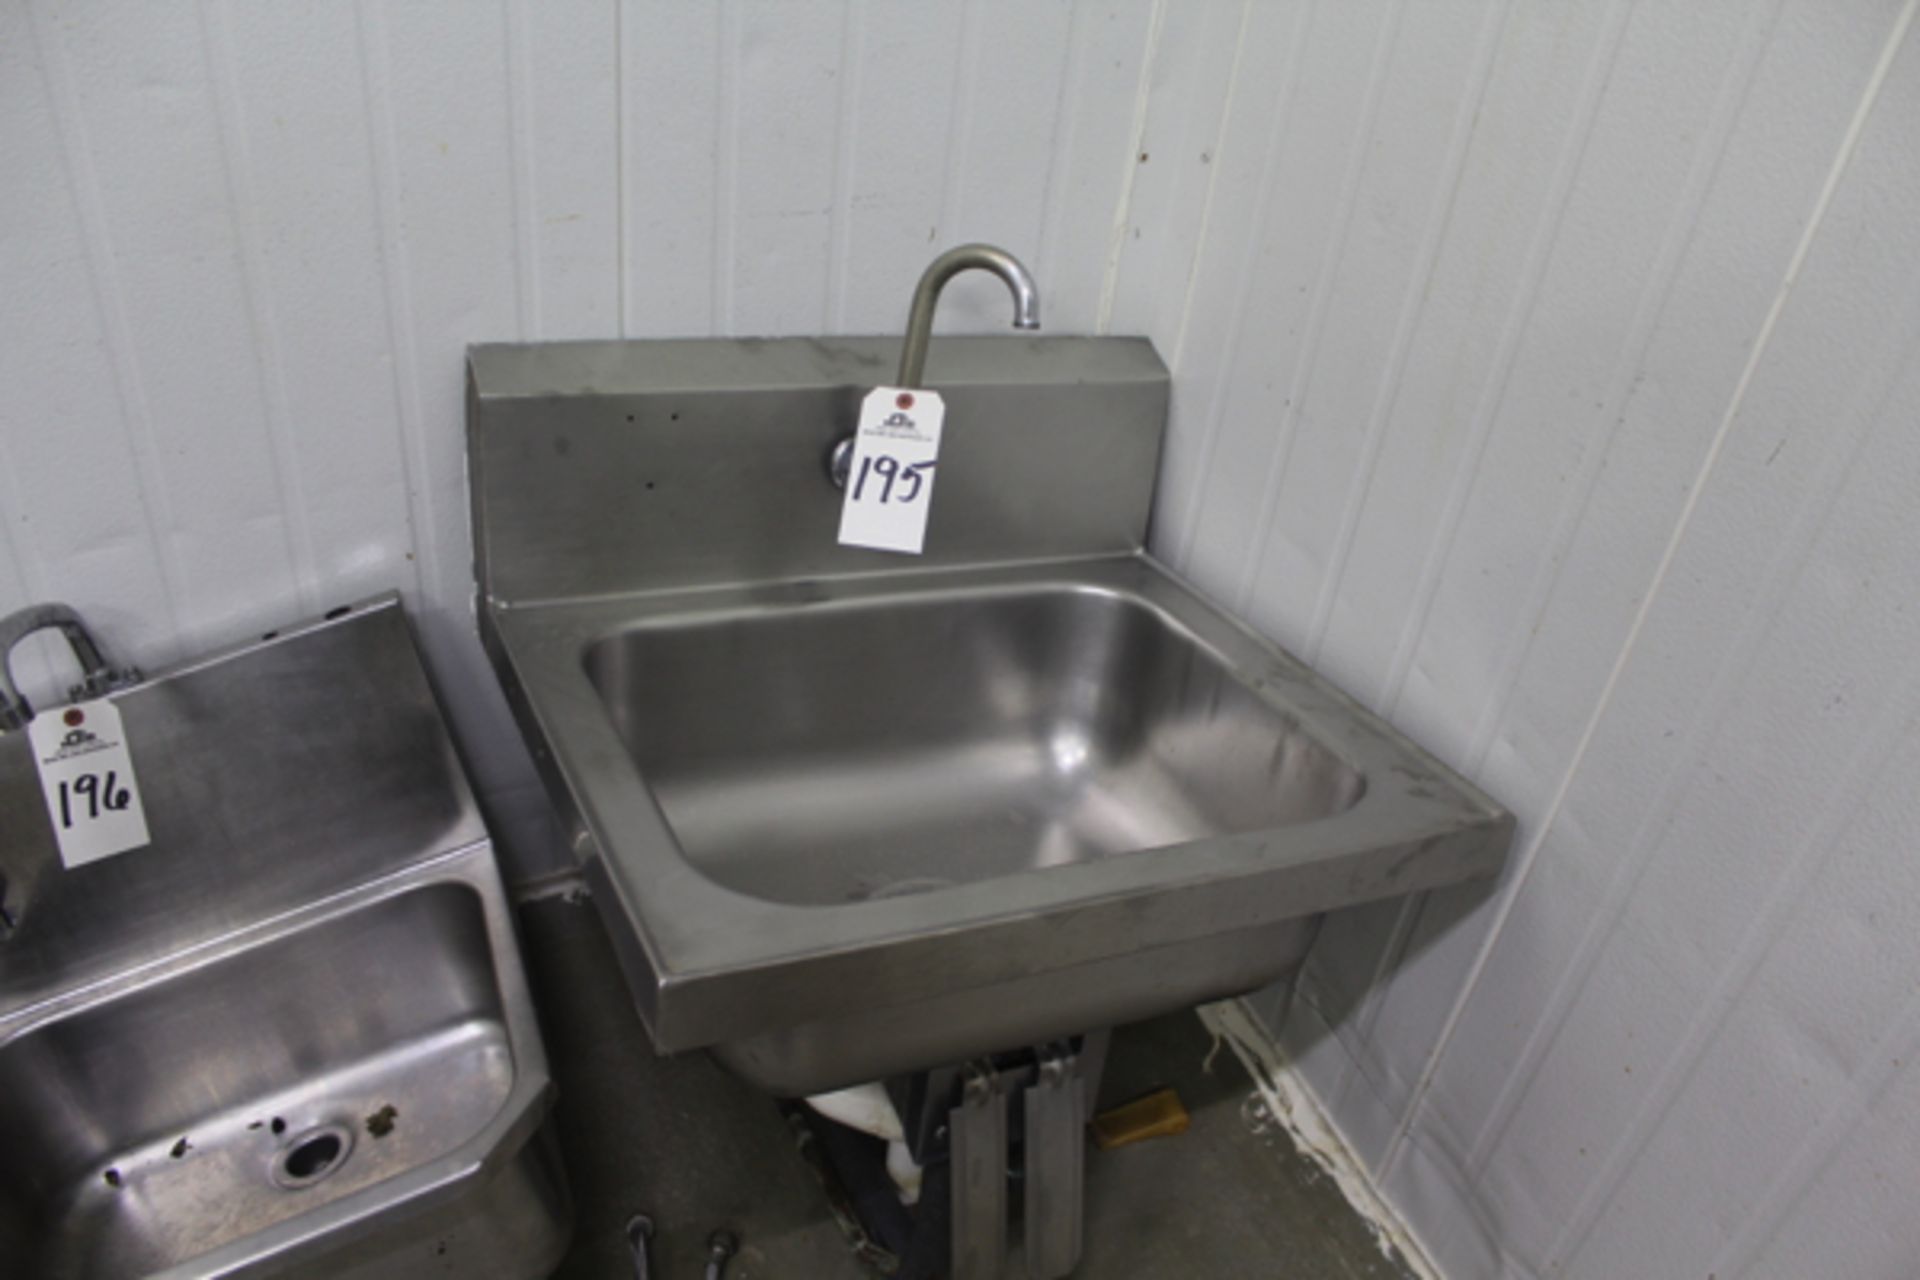 Stainless Steel Wash Sink | Rigging Price: $25 or May Hand Carry